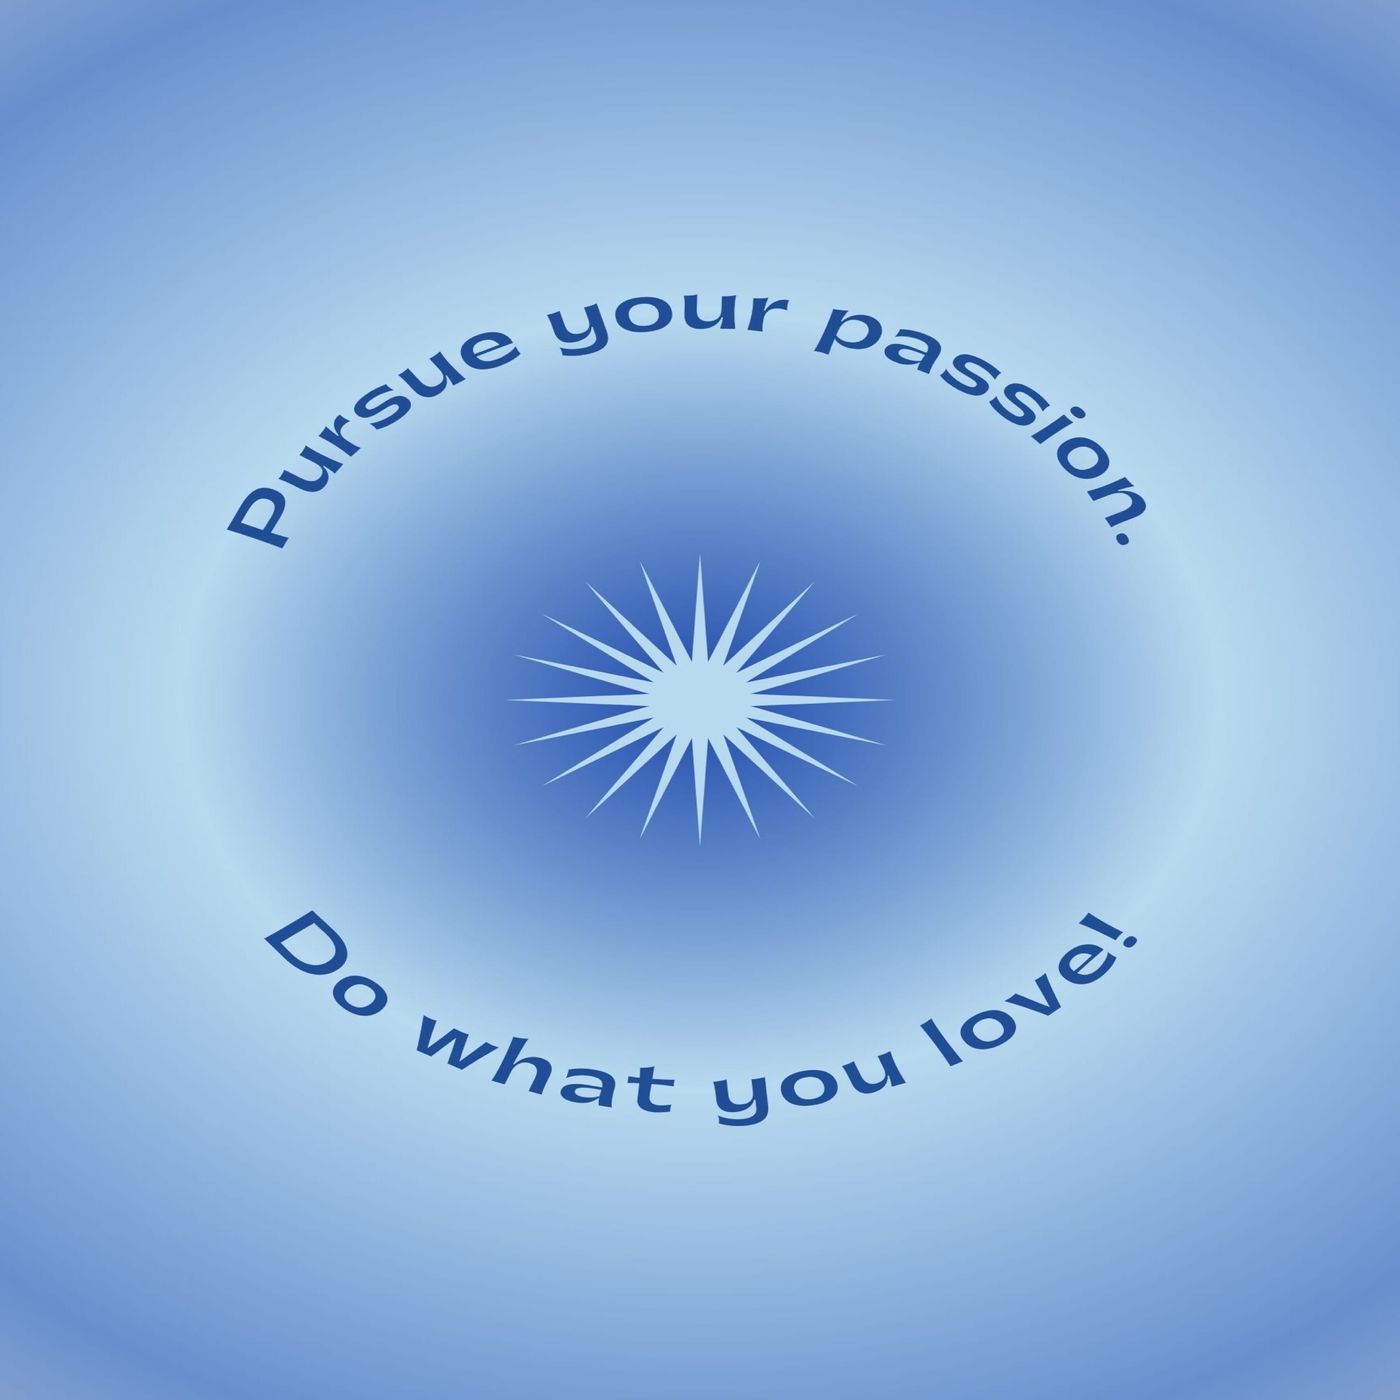 Episode 34 - Pursue your Passion/Do What You Love